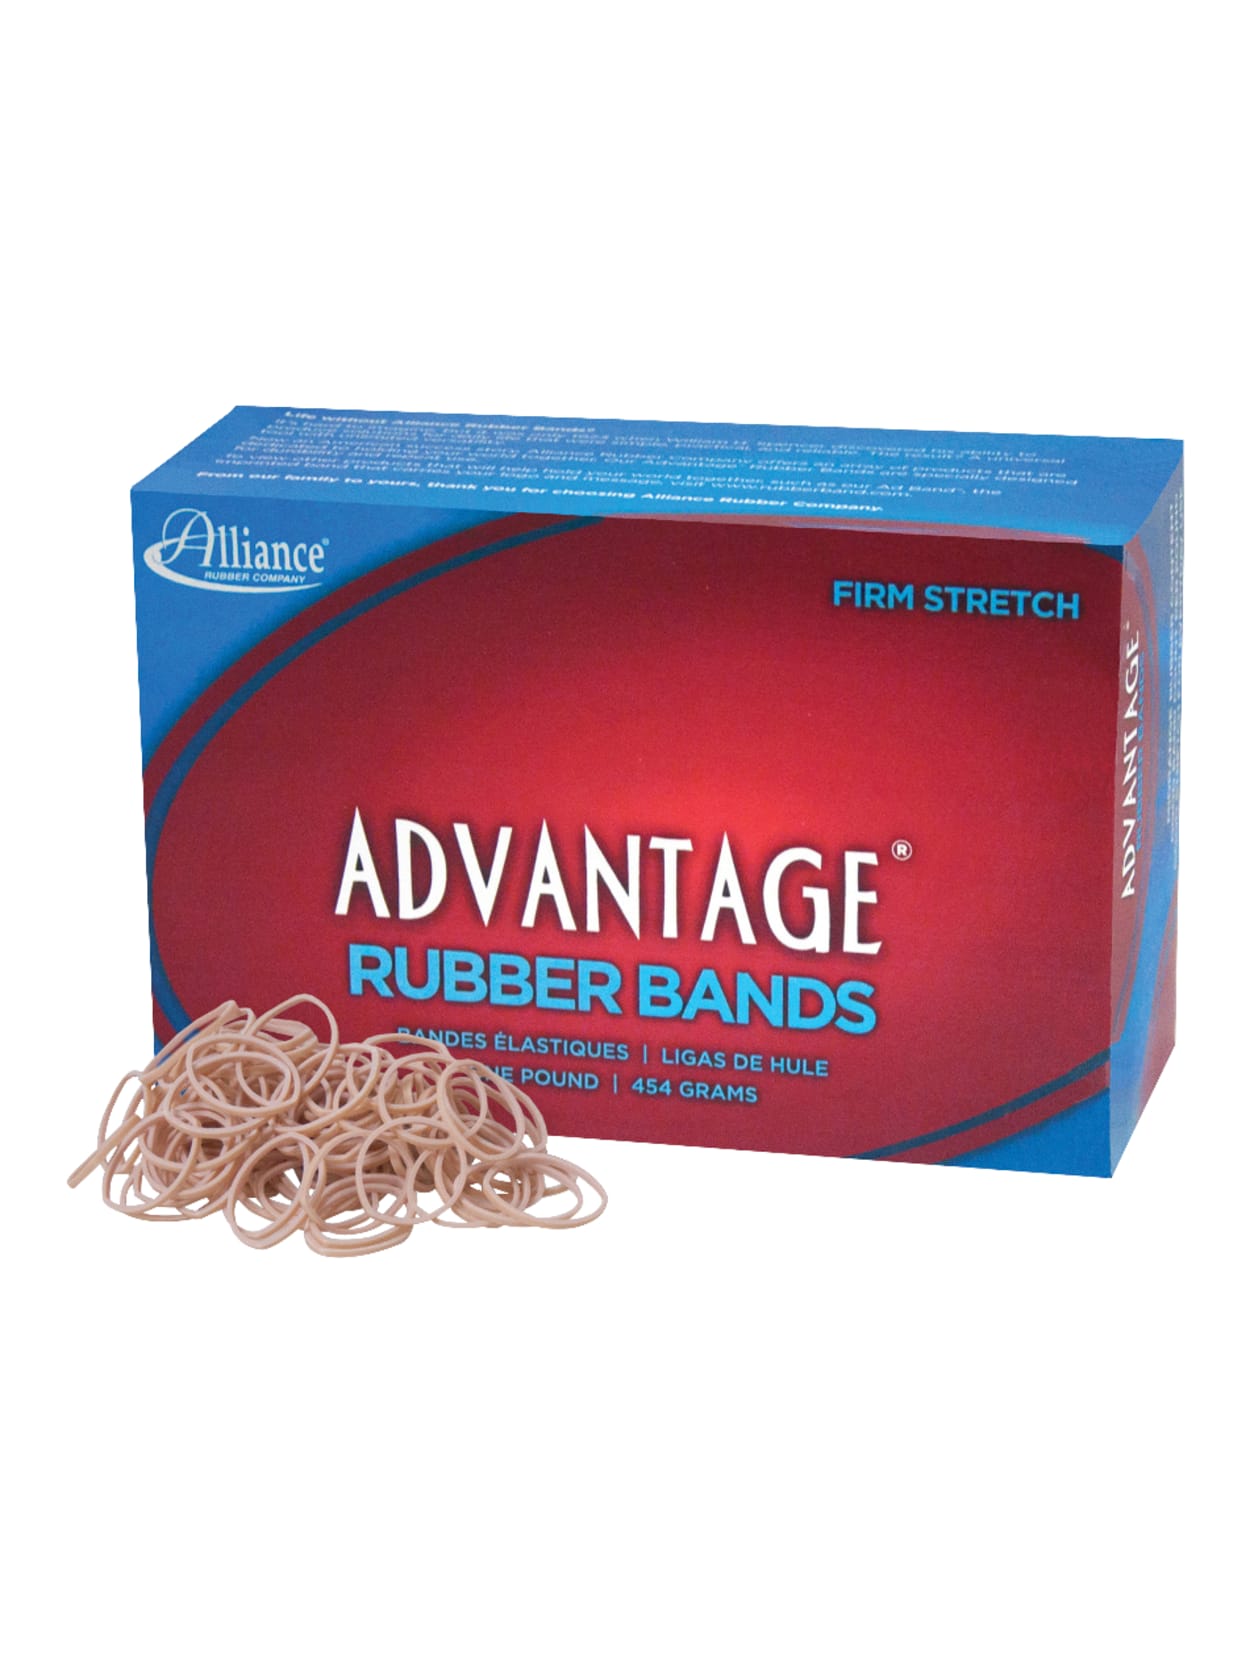 size 10 rubber bands